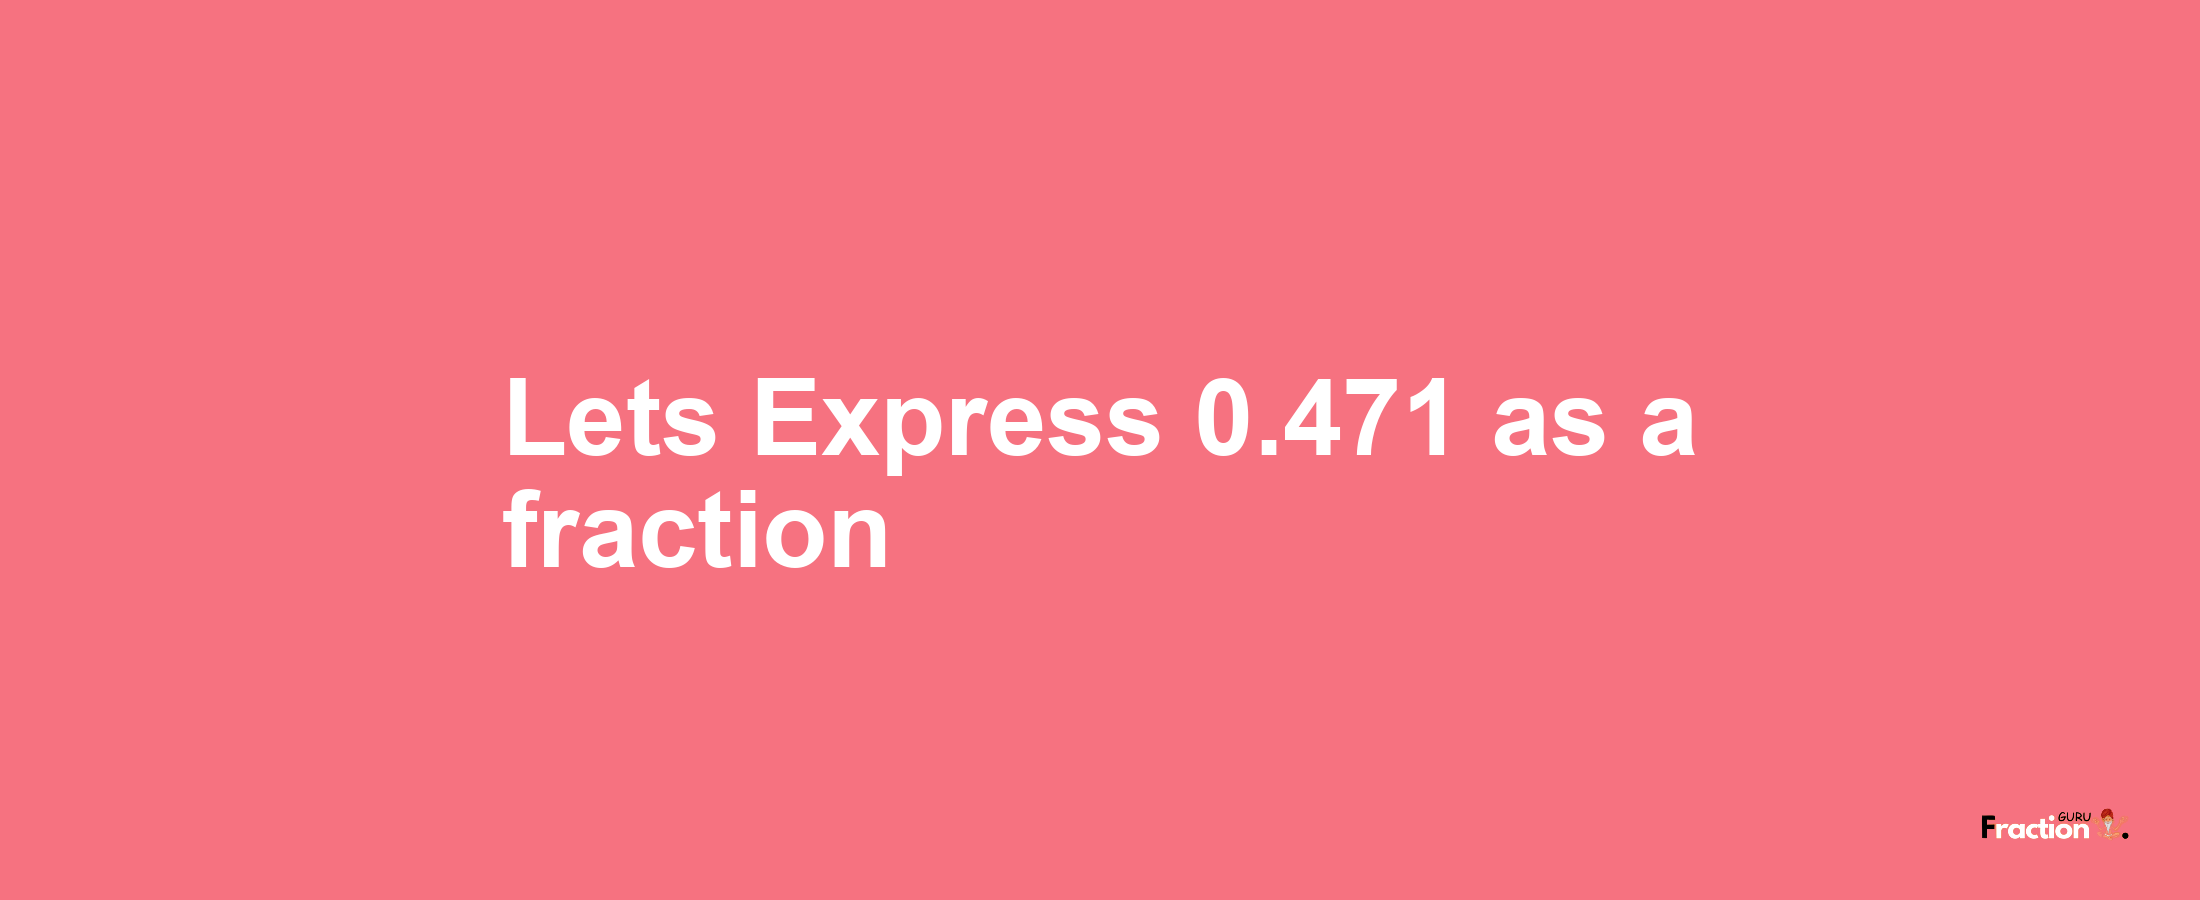 Lets Express 0.471 as afraction